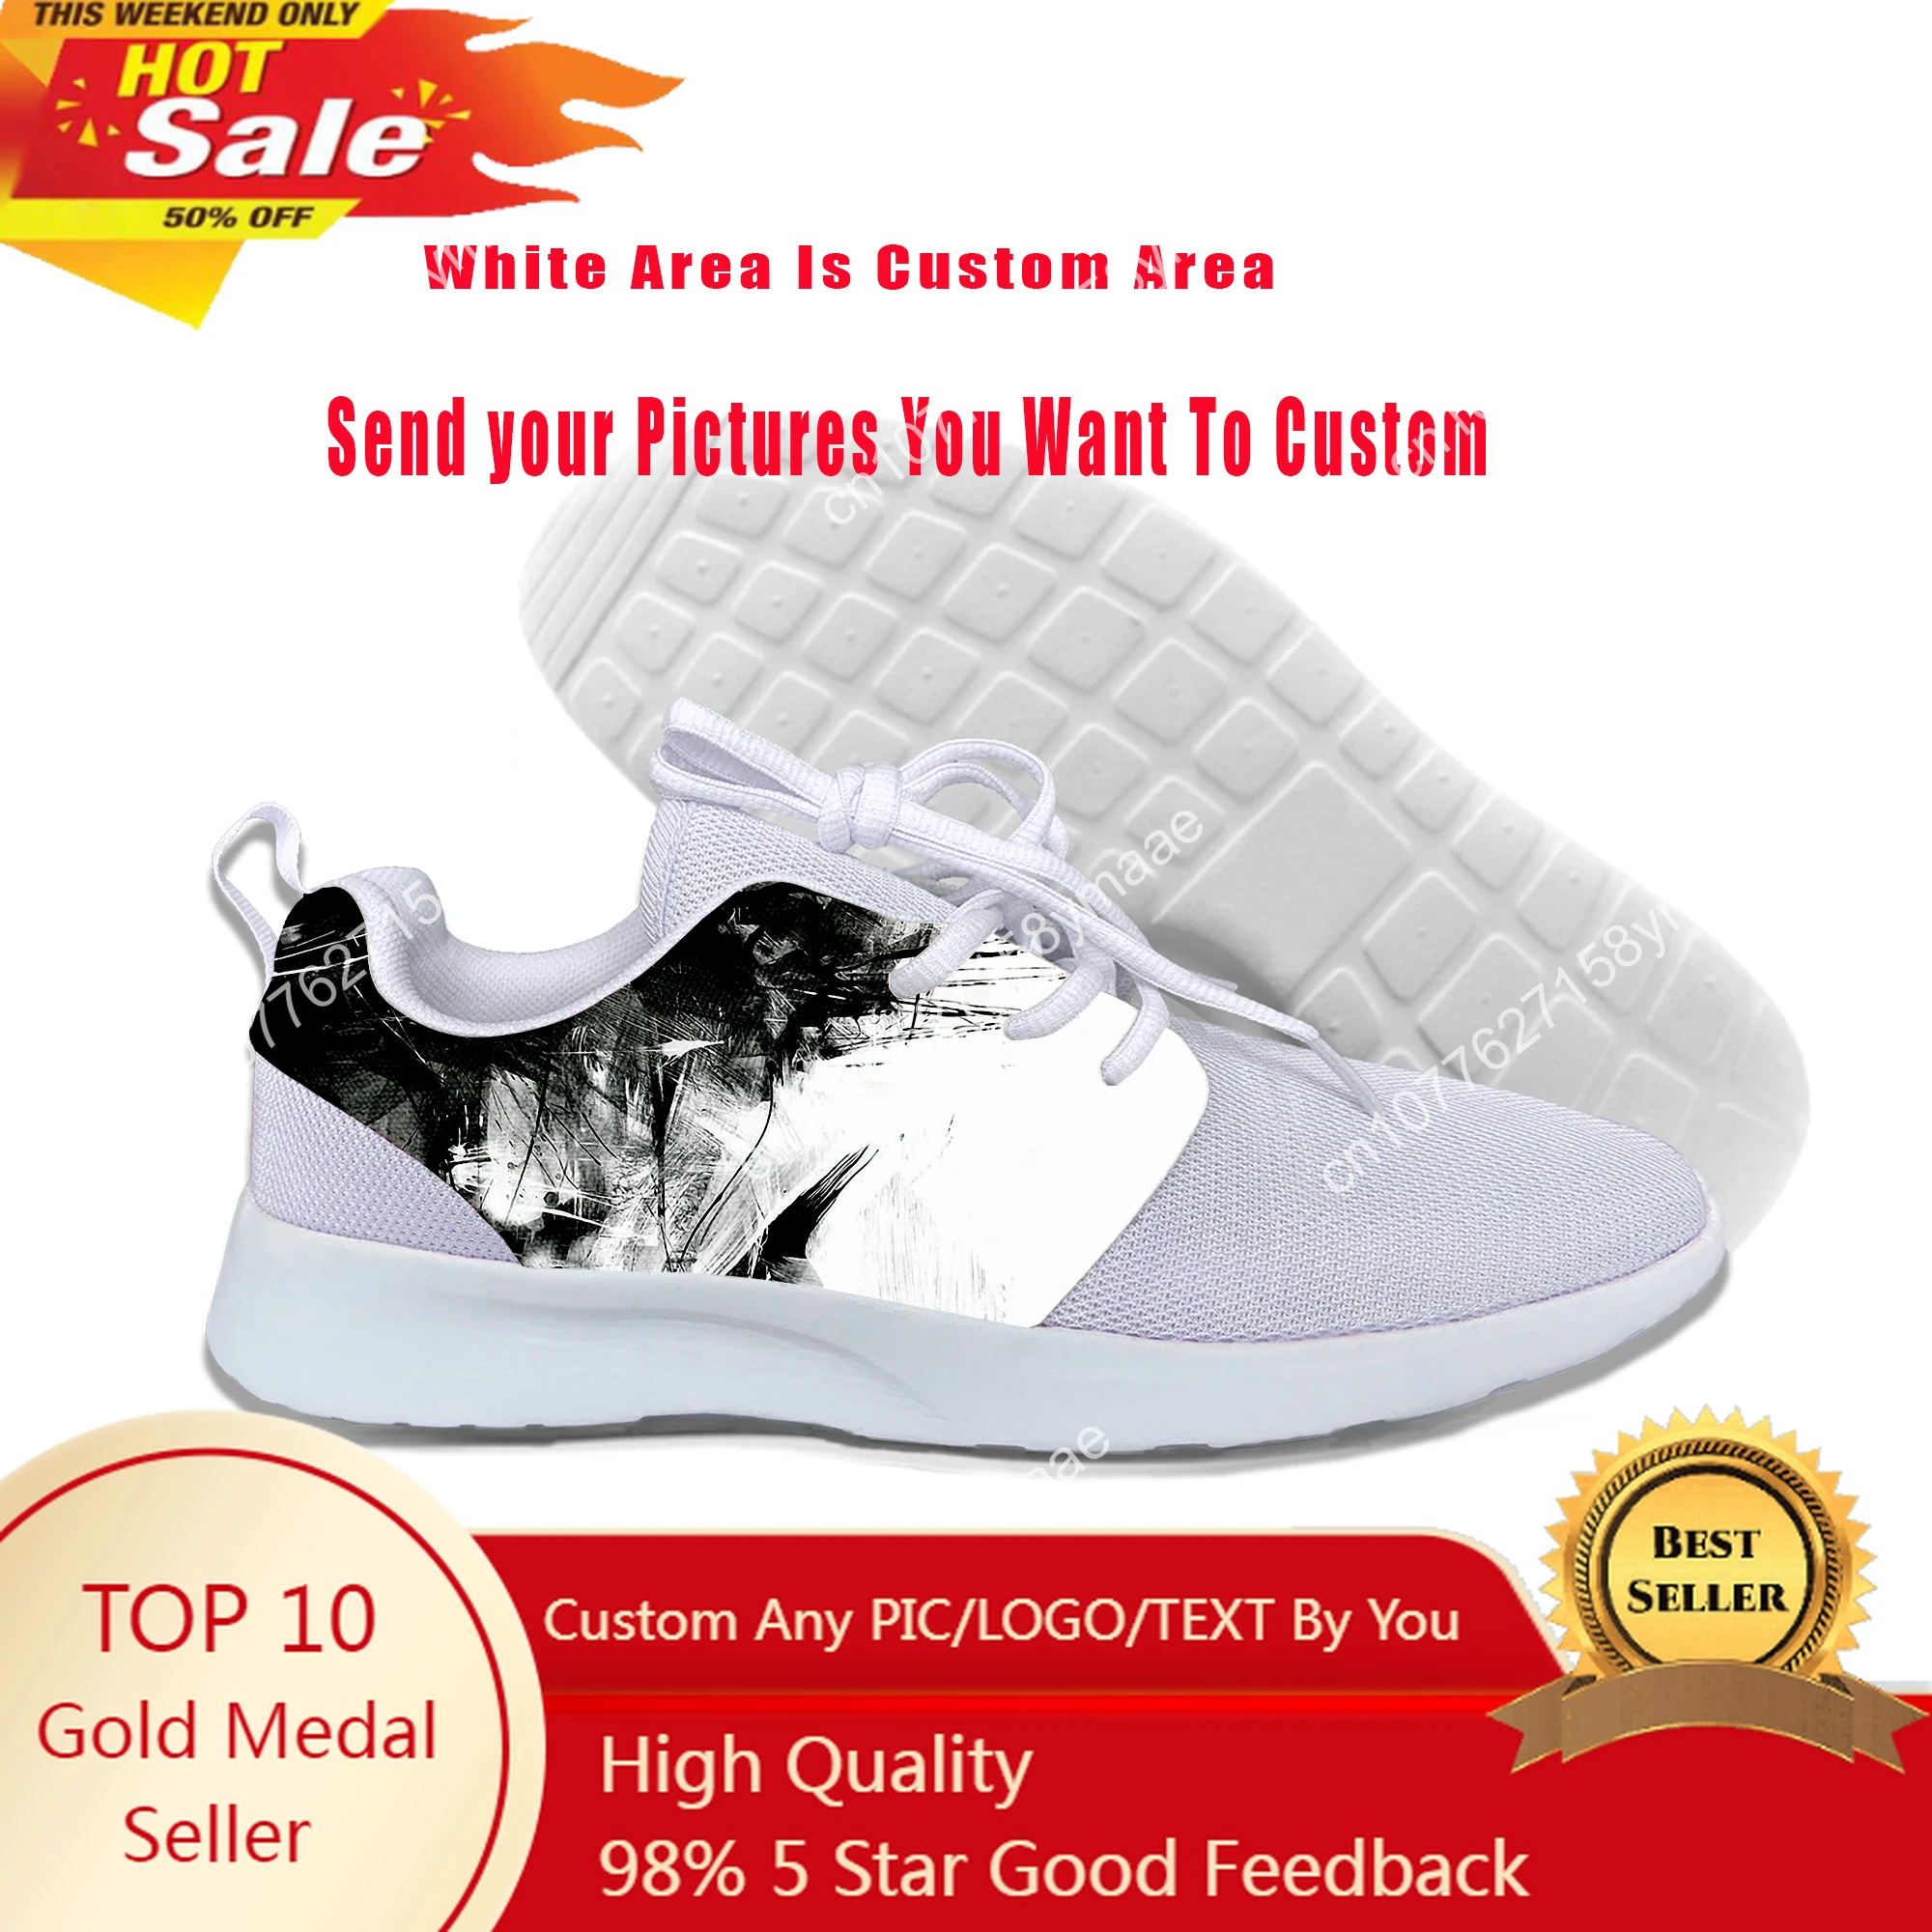 Hot Cool Splashed Paint Casual Shoes Summer Shoes Men Short Printed 3D Sneakers Lightweight Running Shoes Classic Sports Shoes summer new trendy shoes men 2021 knife edge flying woven lightweight breathable casual sports shoes running shoes men shoes